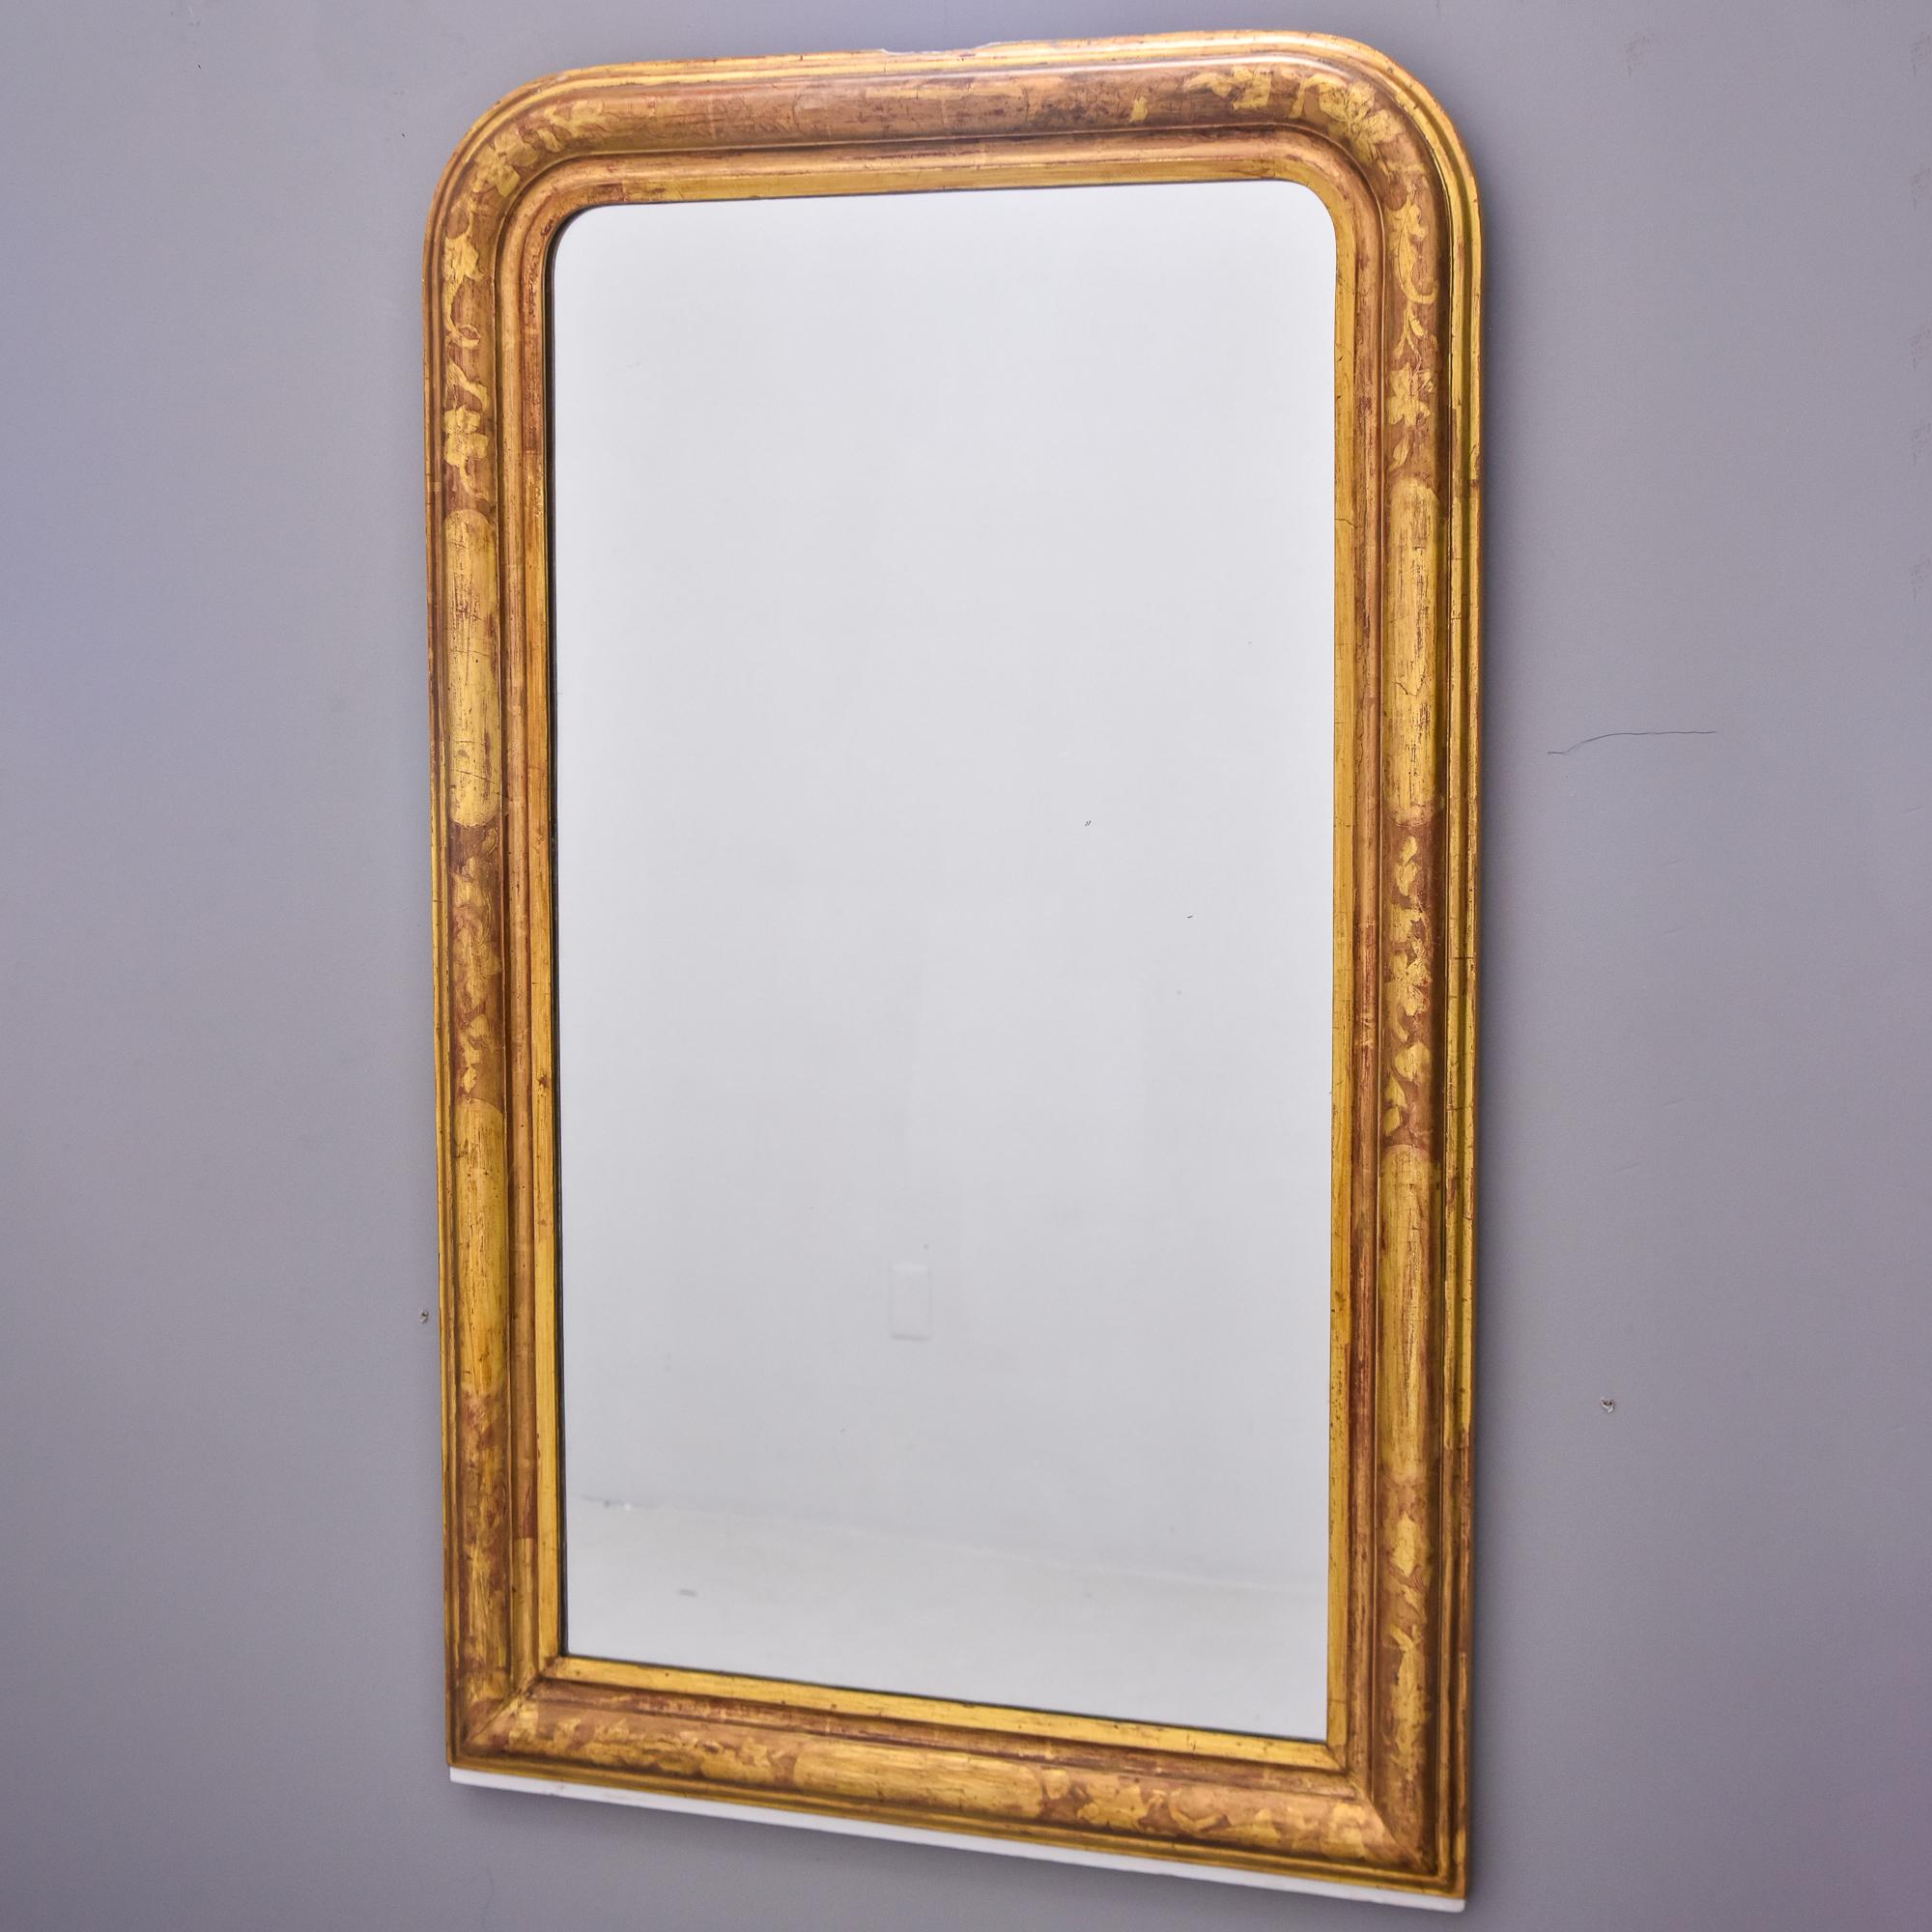 Found in France, this gilt wood Louis Philippe frame dates from approximately 1860s. Newer mirror. Frame has subtle etched pattern of flowers and leaves on a vine. Gilding is a warm gold with a red undertone. Very good antique condition with minor